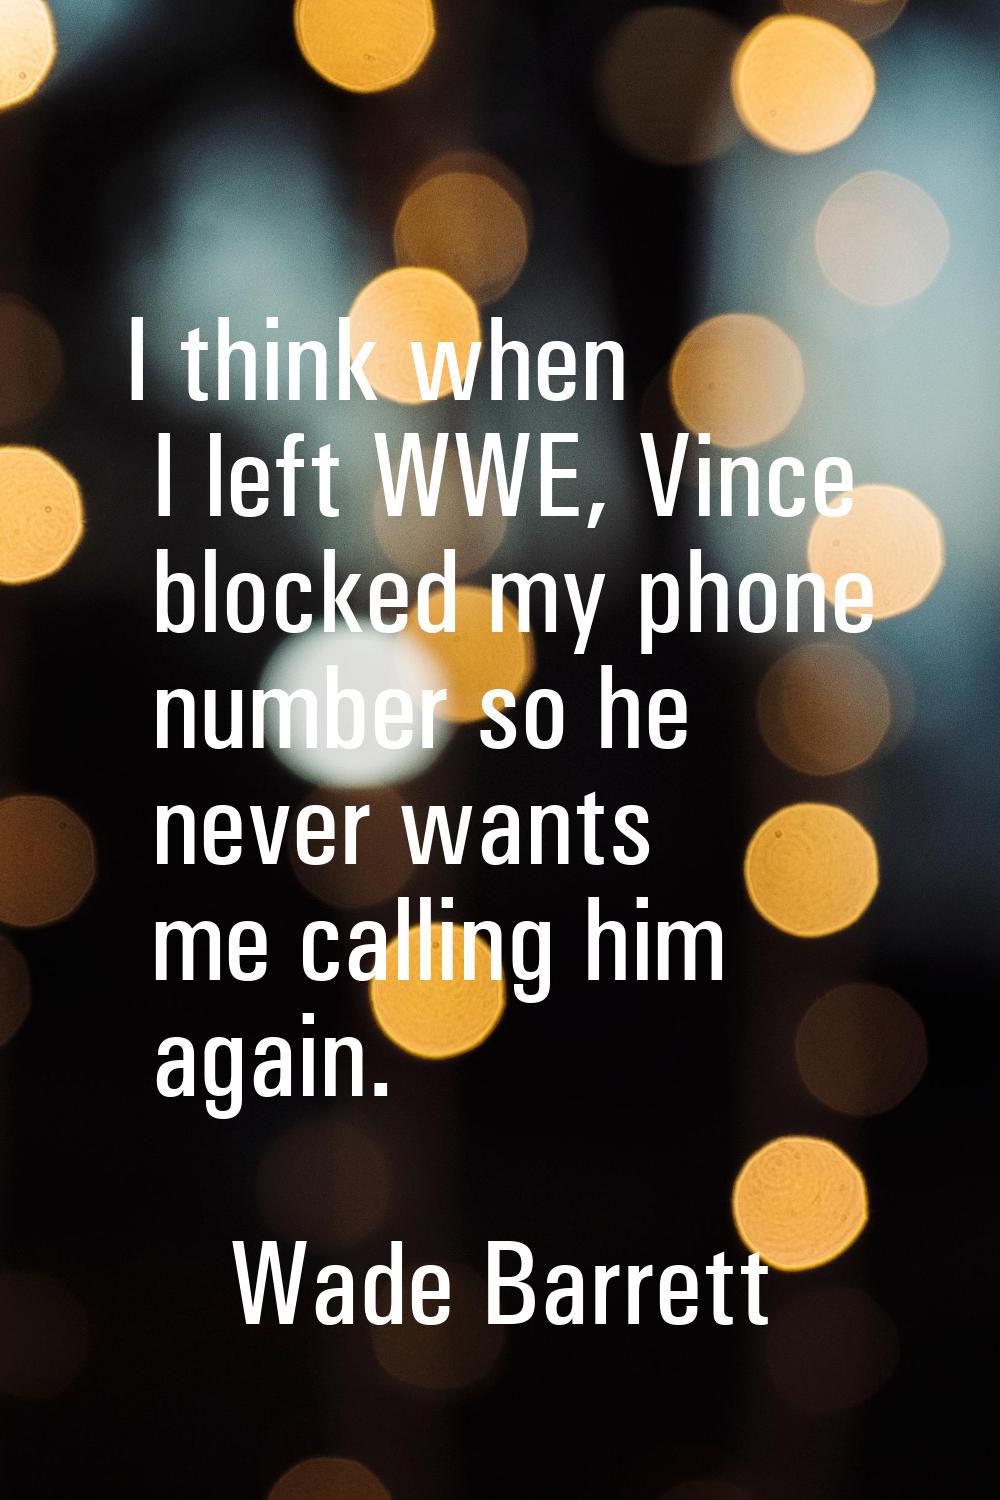 I think when I left WWE, Vince blocked my phone number so he never wants me calling him again.